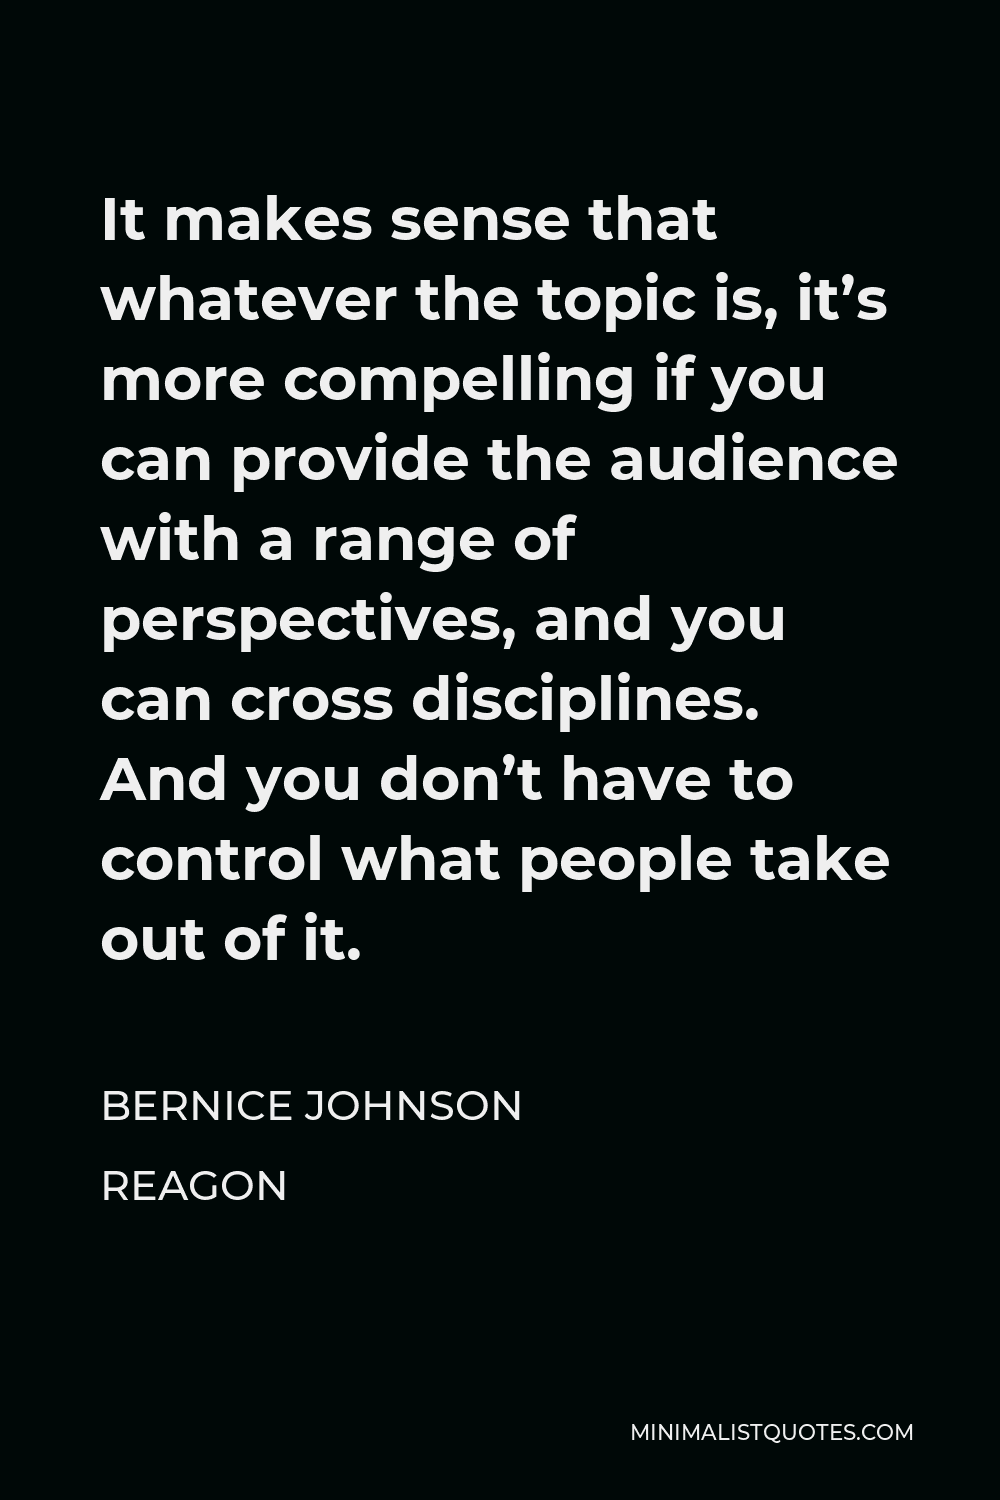 Bernice Johnson Reagon Quote - It makes sense that whatever the topic is, it’s more compelling if you can provide the audience with a range of perspectives, and you can cross disciplines. And you don’t have to control what people take out of it.